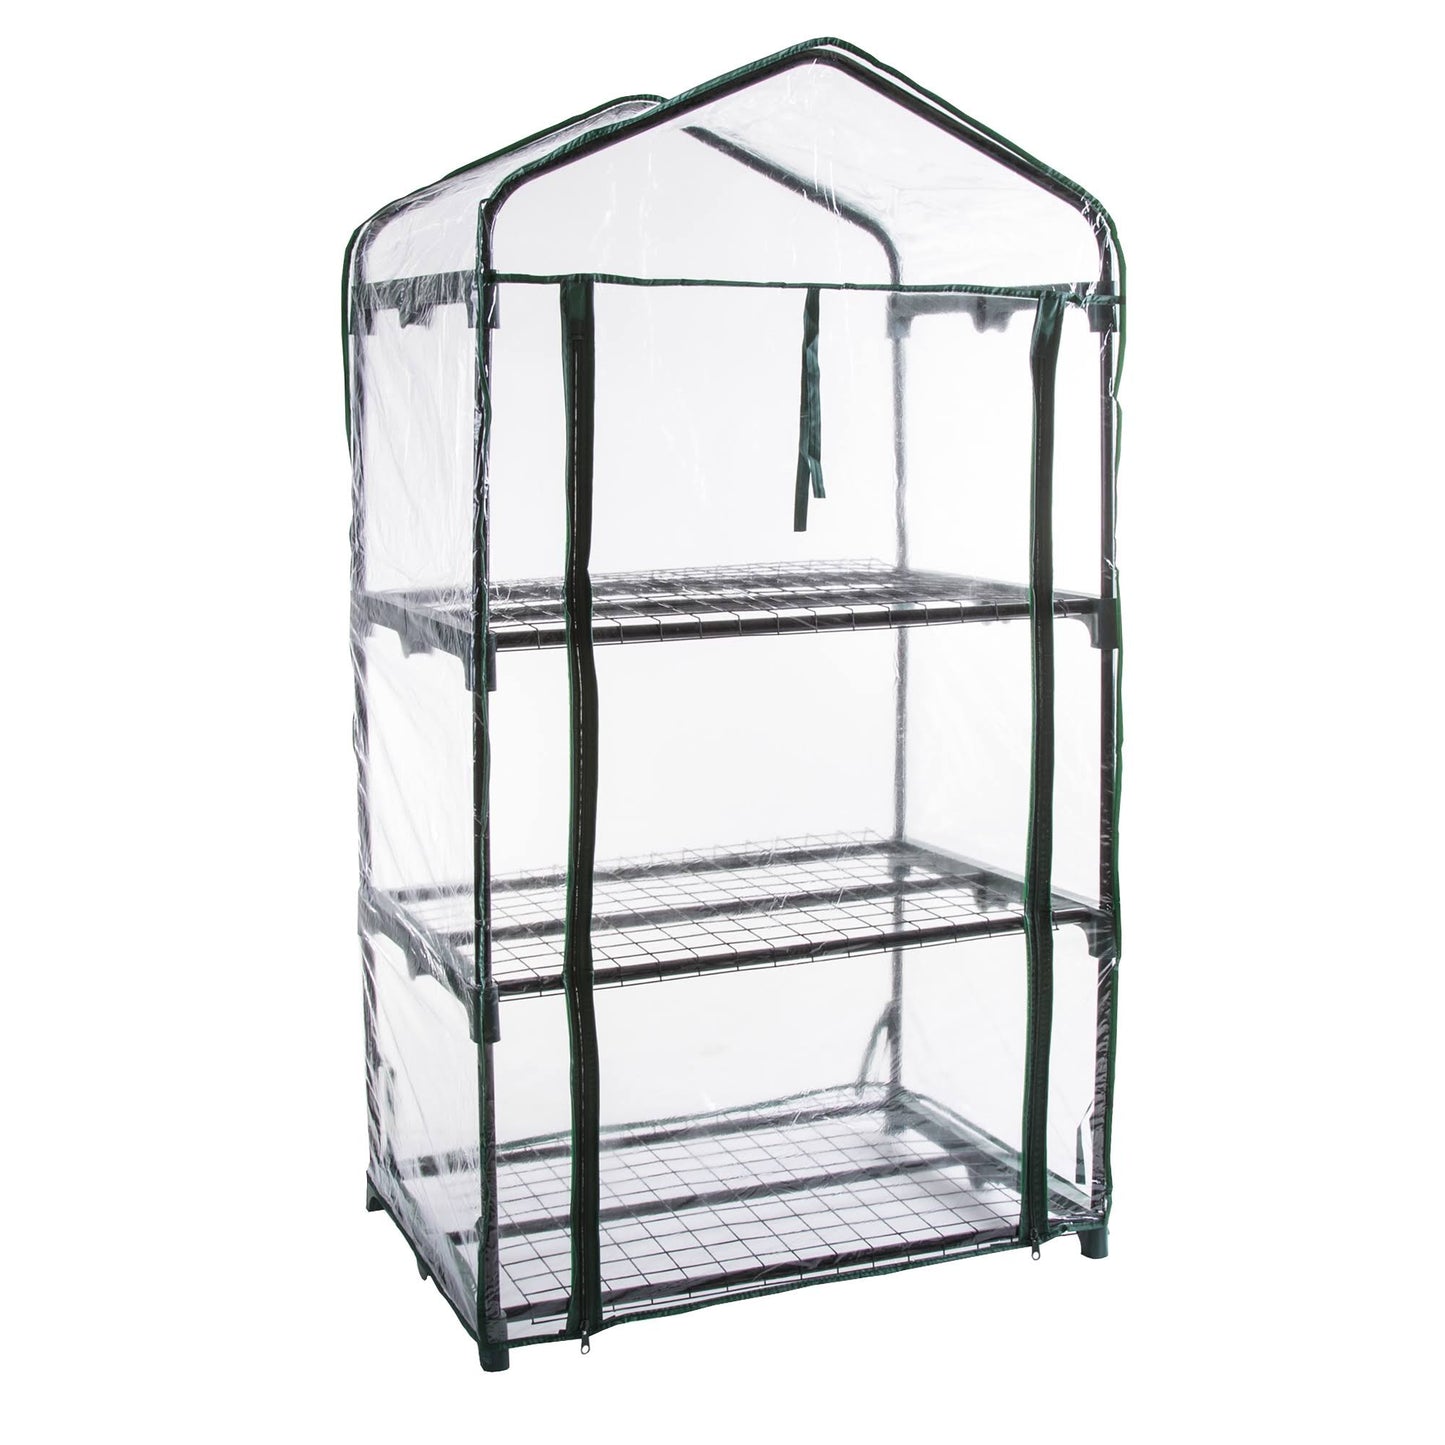 GENESIS 3 Tier Portable Rolling Greenhouse with Clear Cover GEN-3PVC